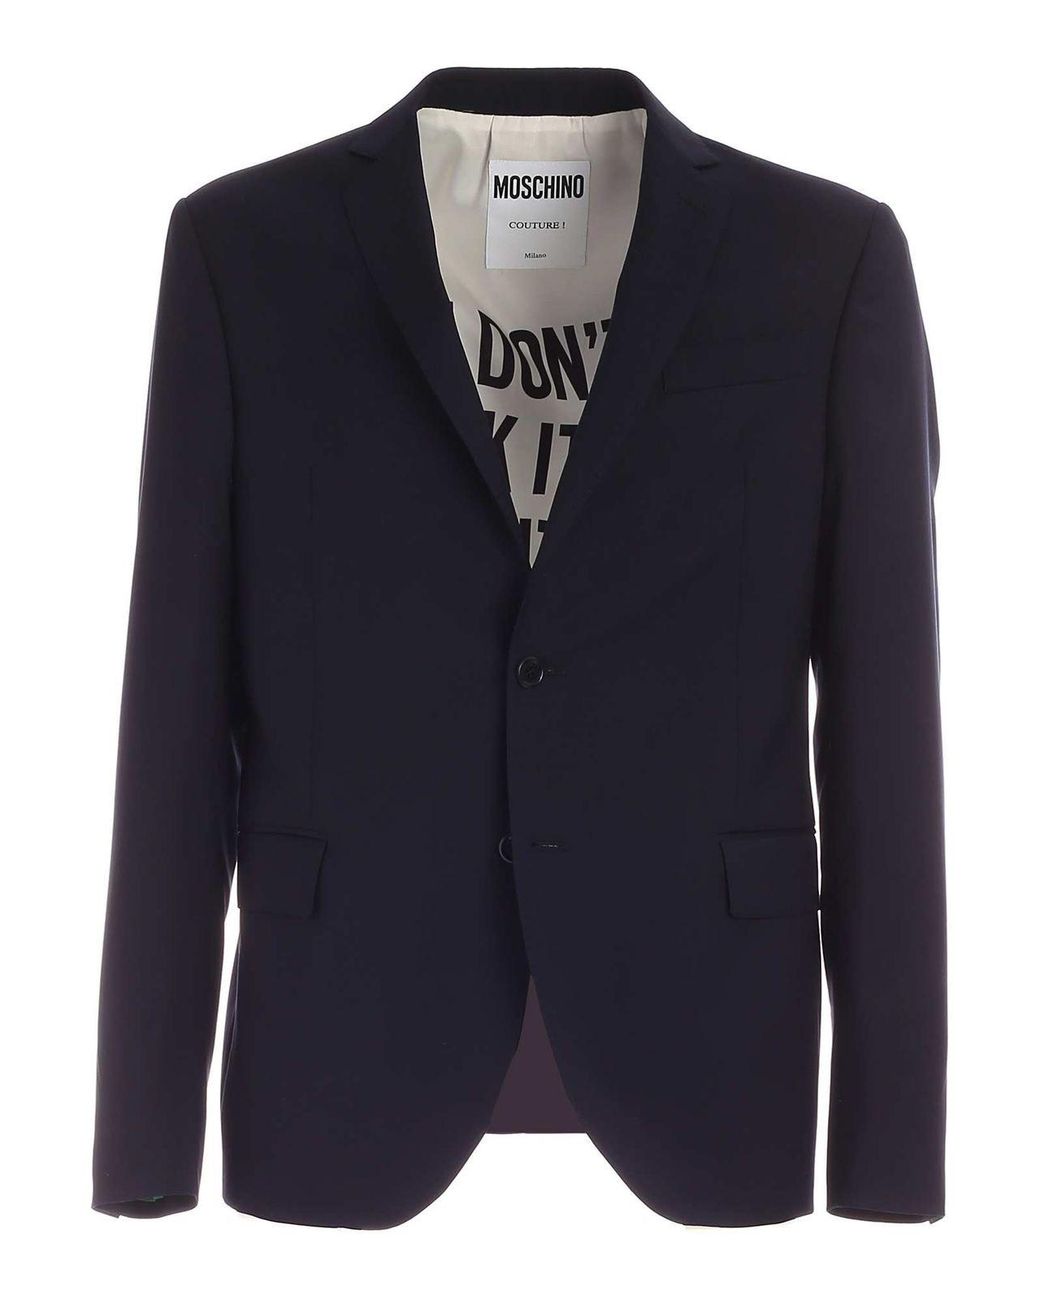 Moschino Wool Single-breasted Suit In Blue for Men - Lyst